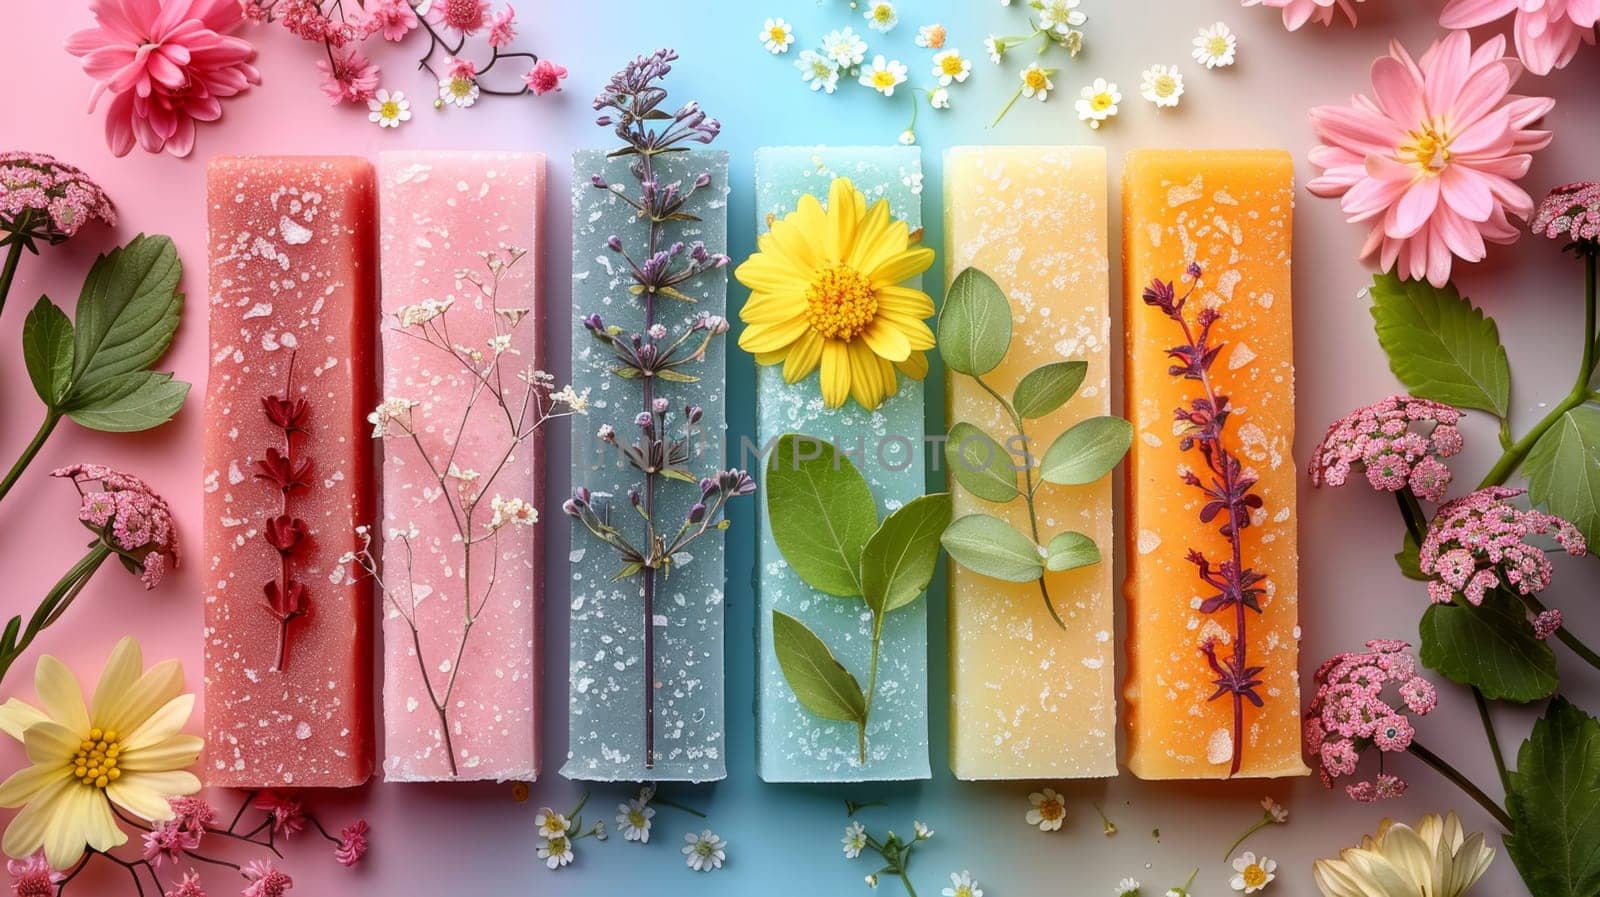 Colorful flowers on pieces of soap. Environmental background design.